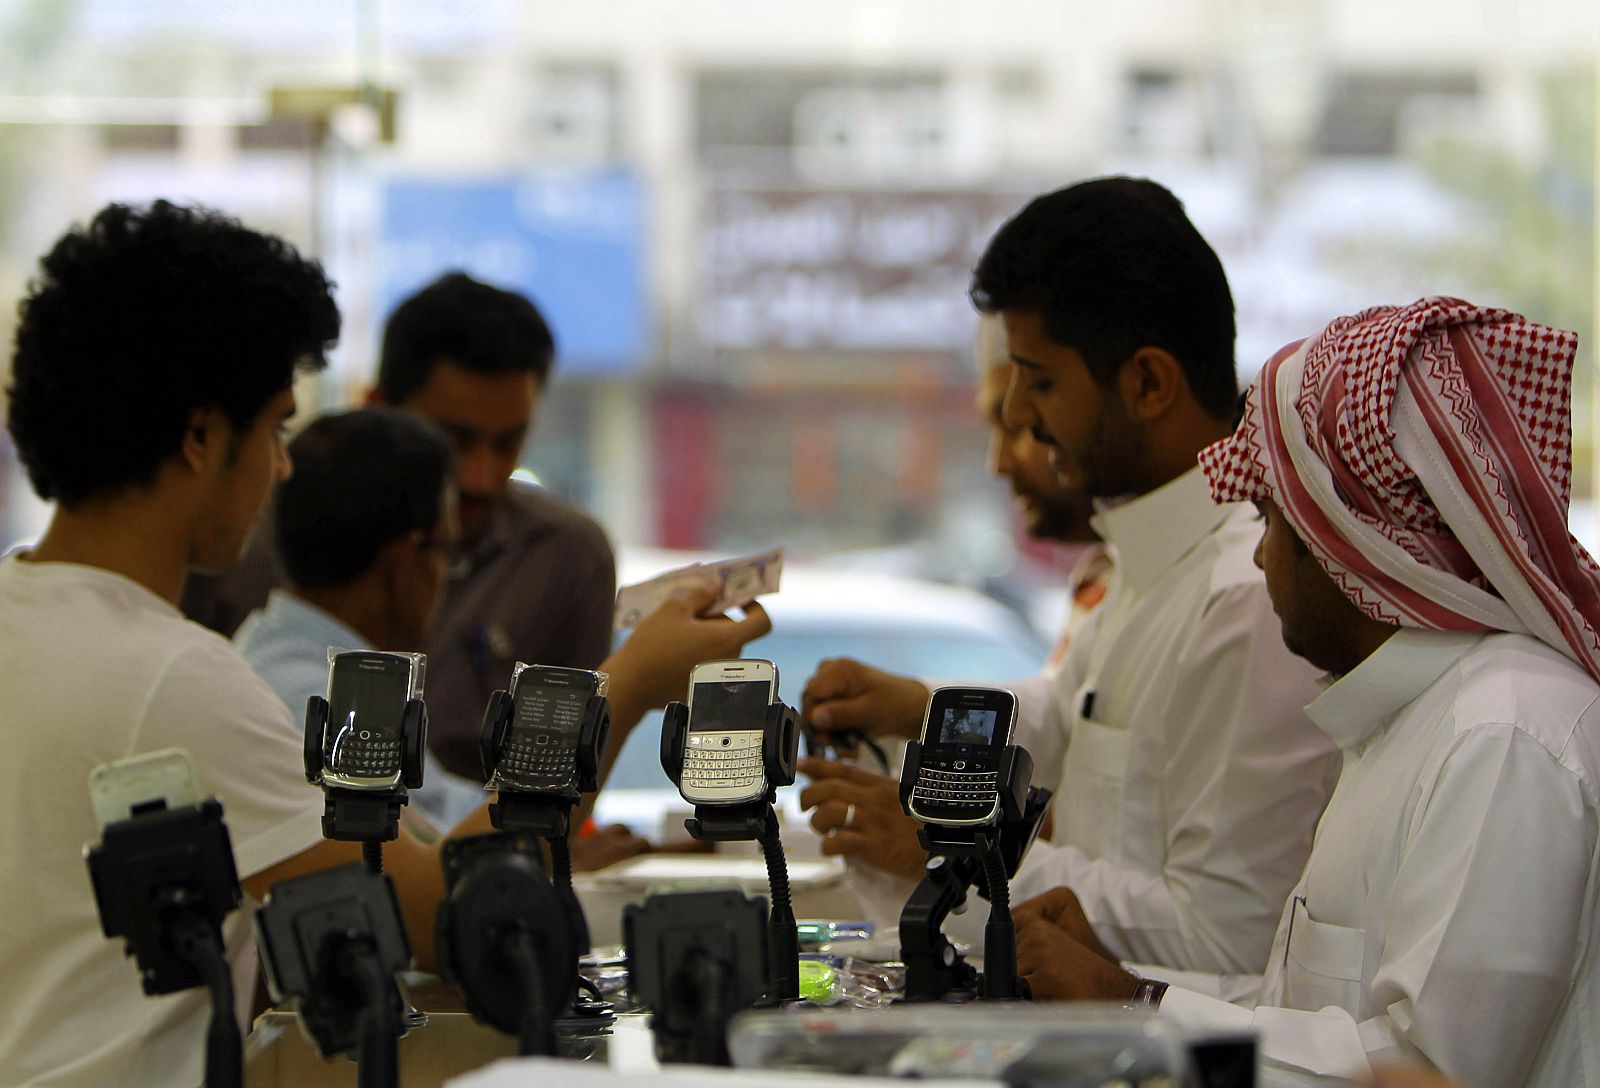 Men stand near BlackBerry phones on sale at a shopping mall in Riyadh